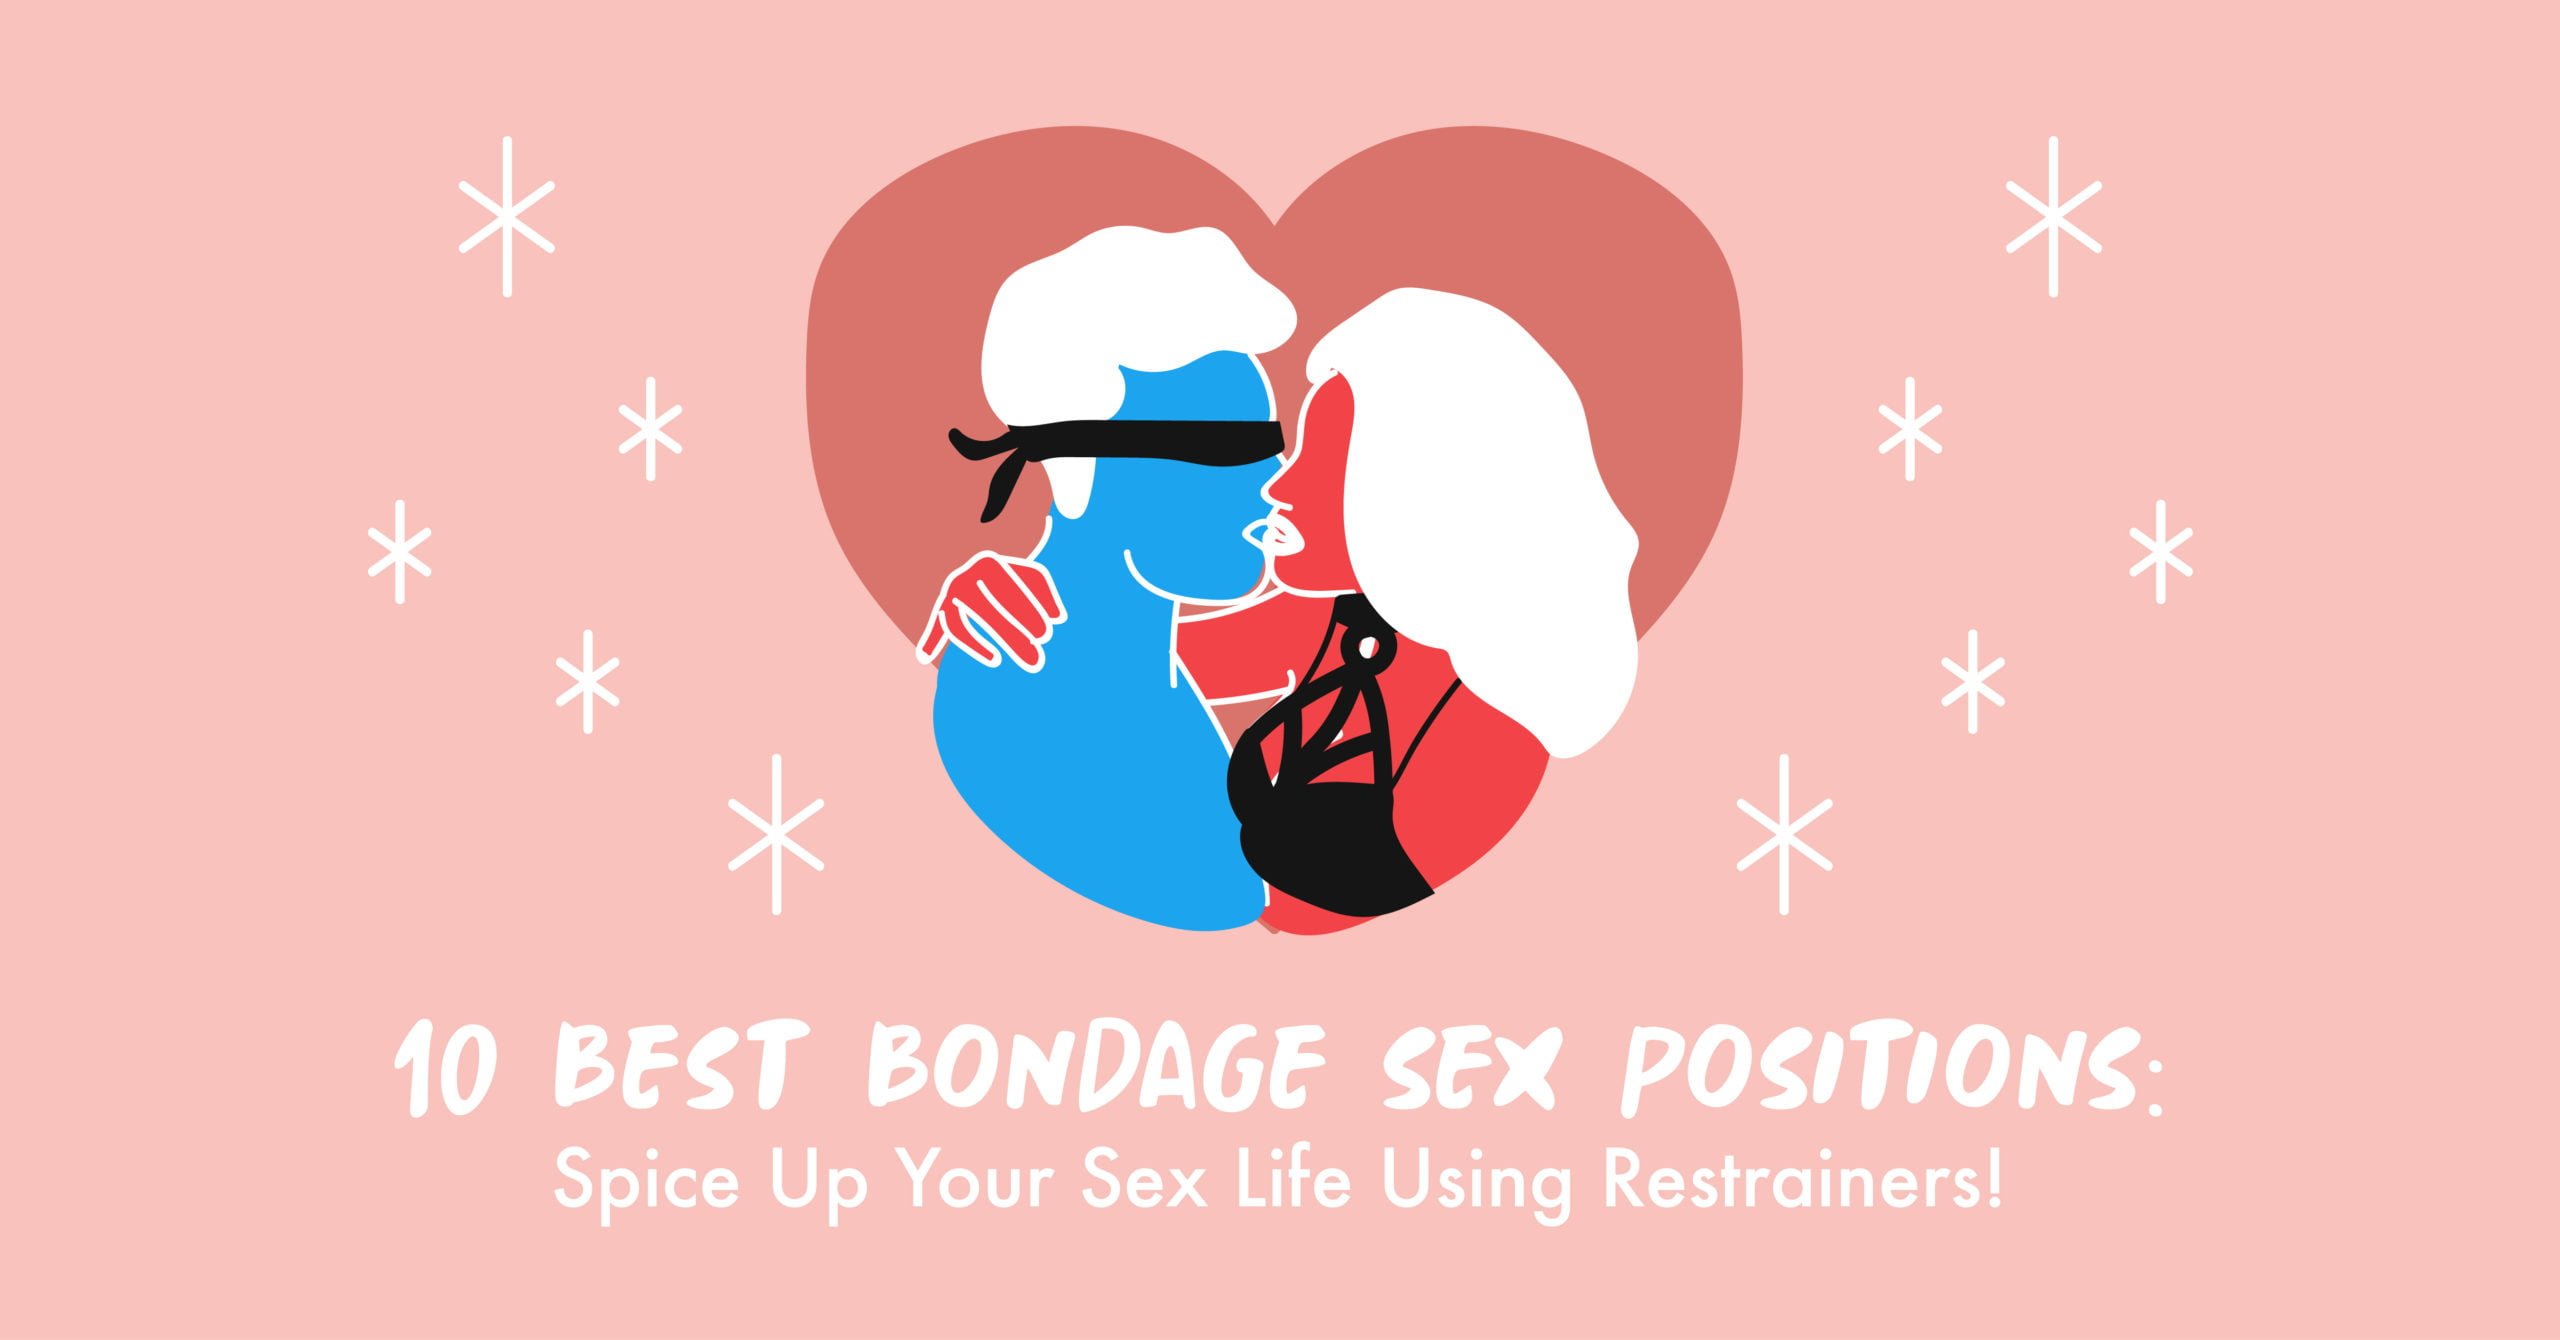 15 Best Bondage Sex Positions Spice Up Your Sex Life Using Restrainers! image